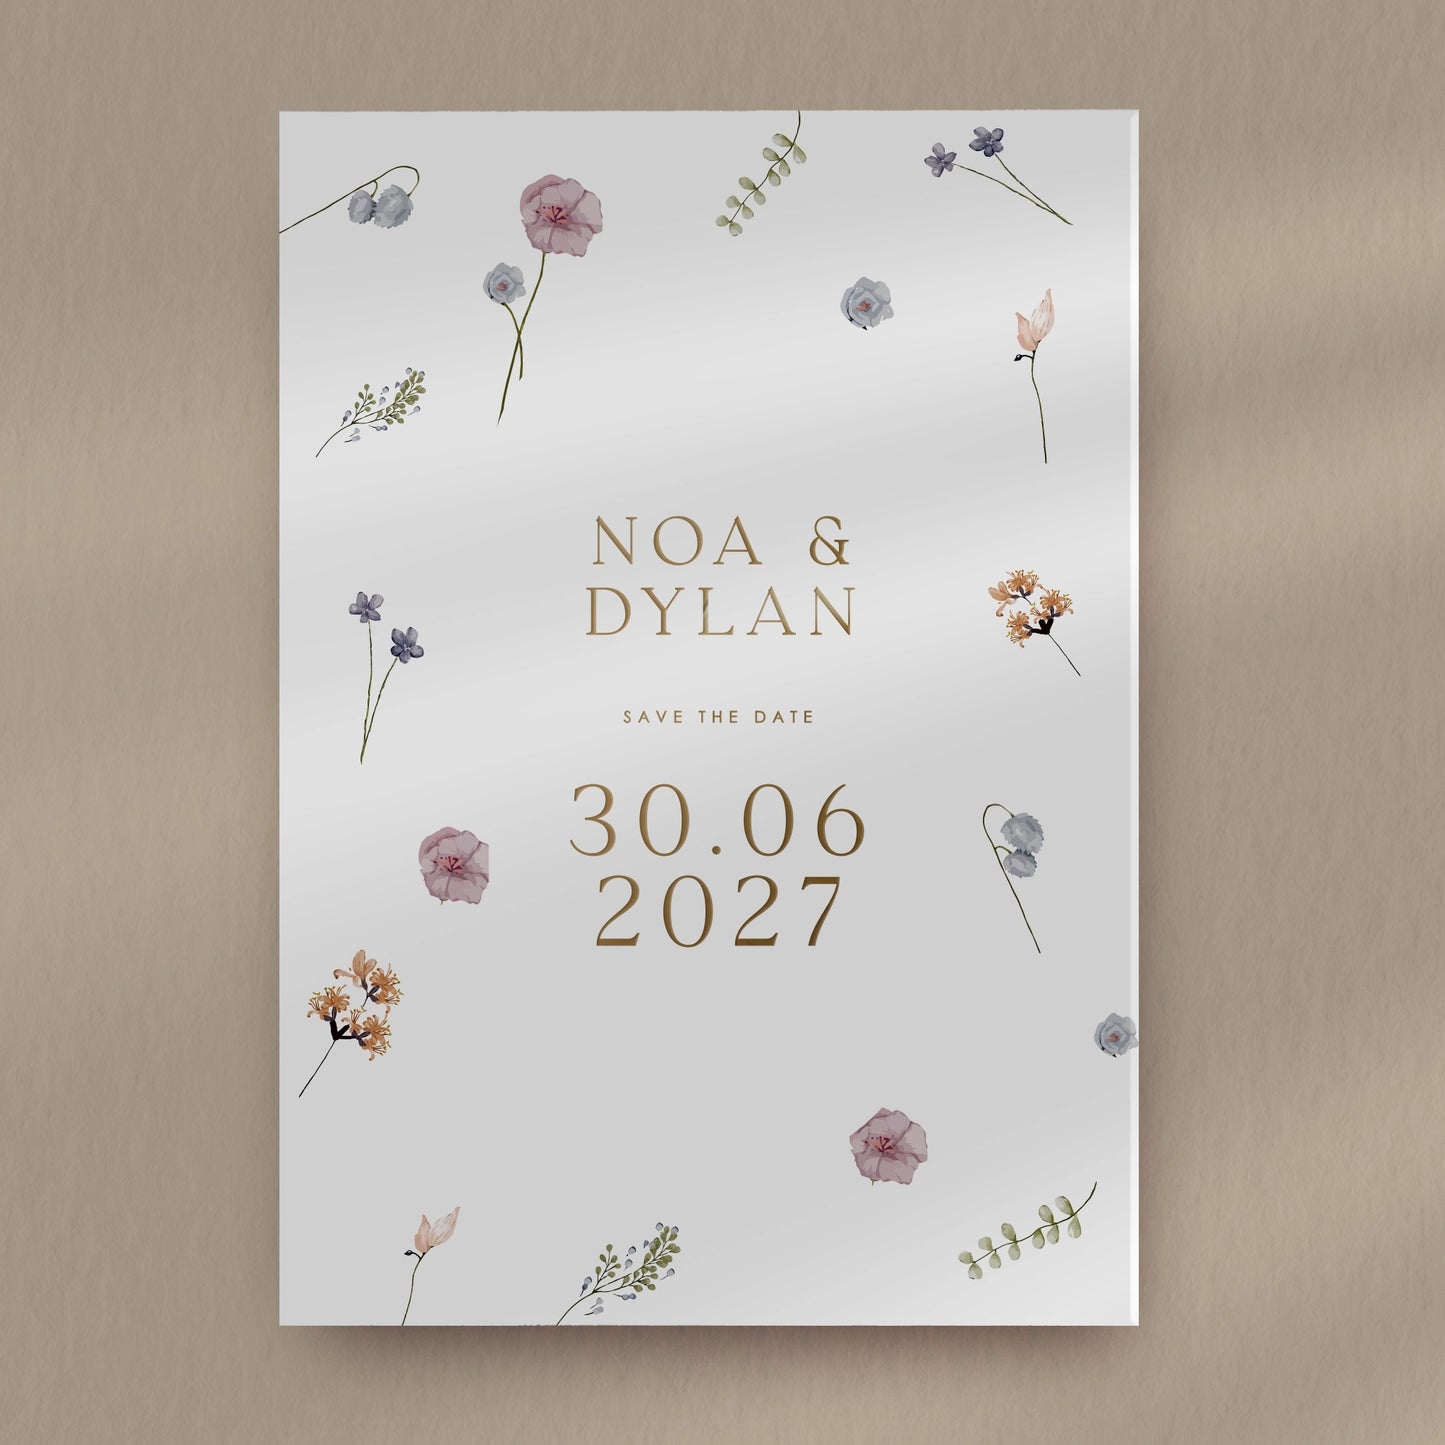 Save The Date Sample